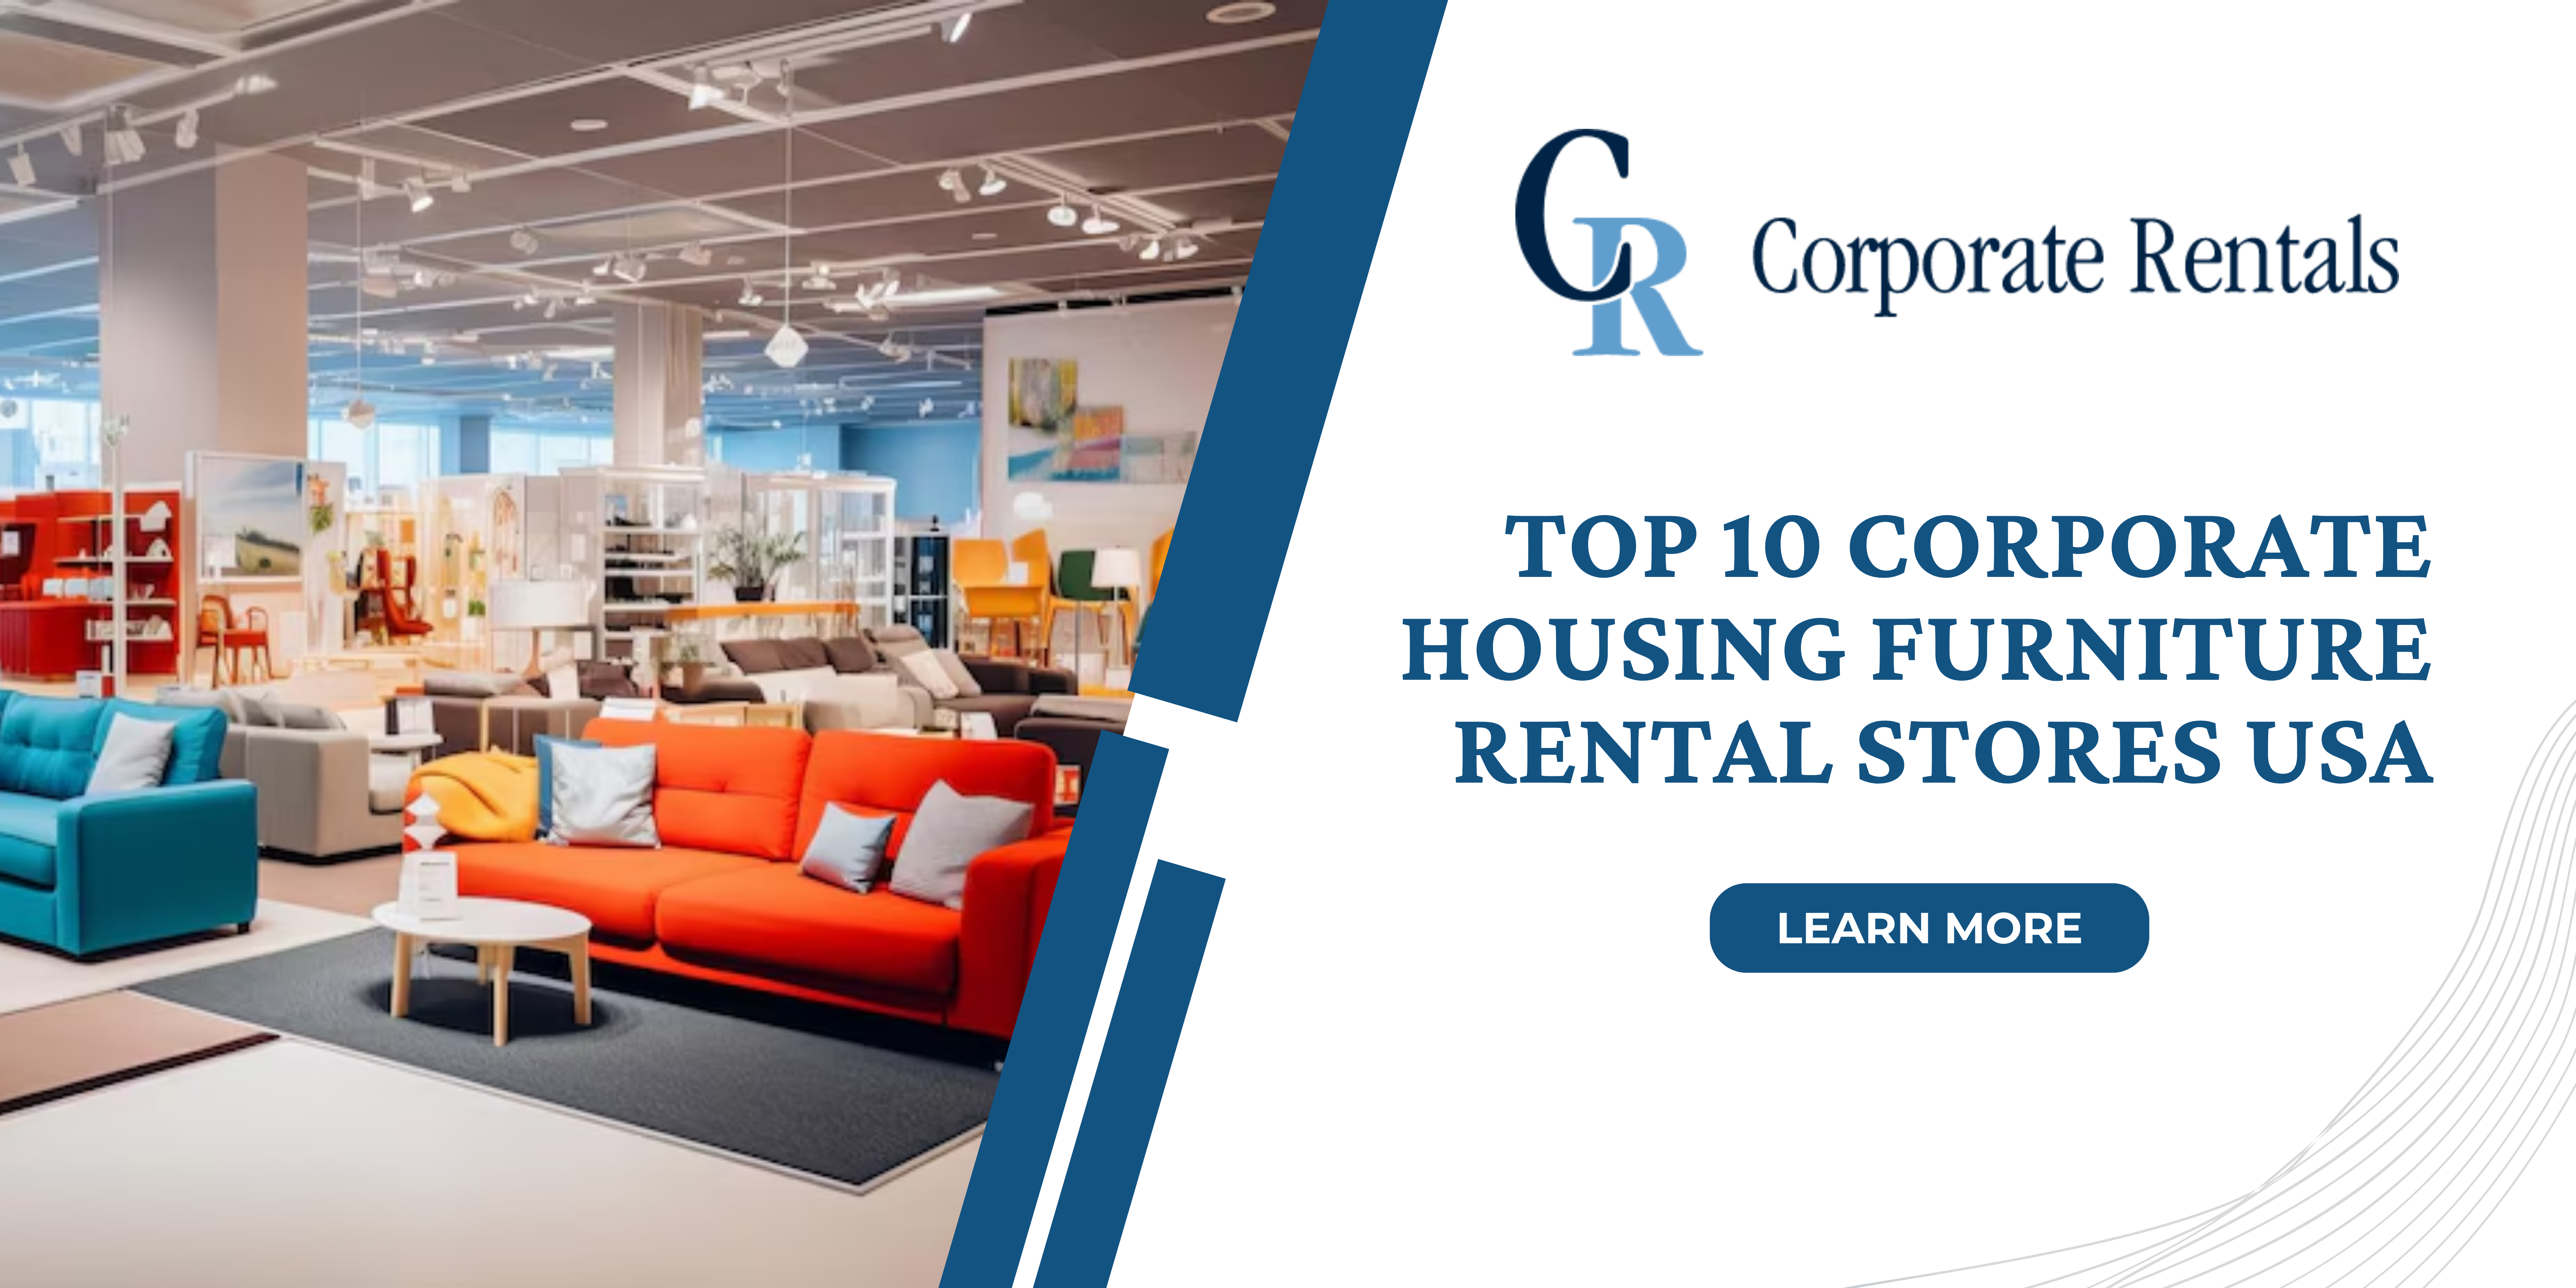 Top 10 Corporate Housing Furniture Rental Stores USA